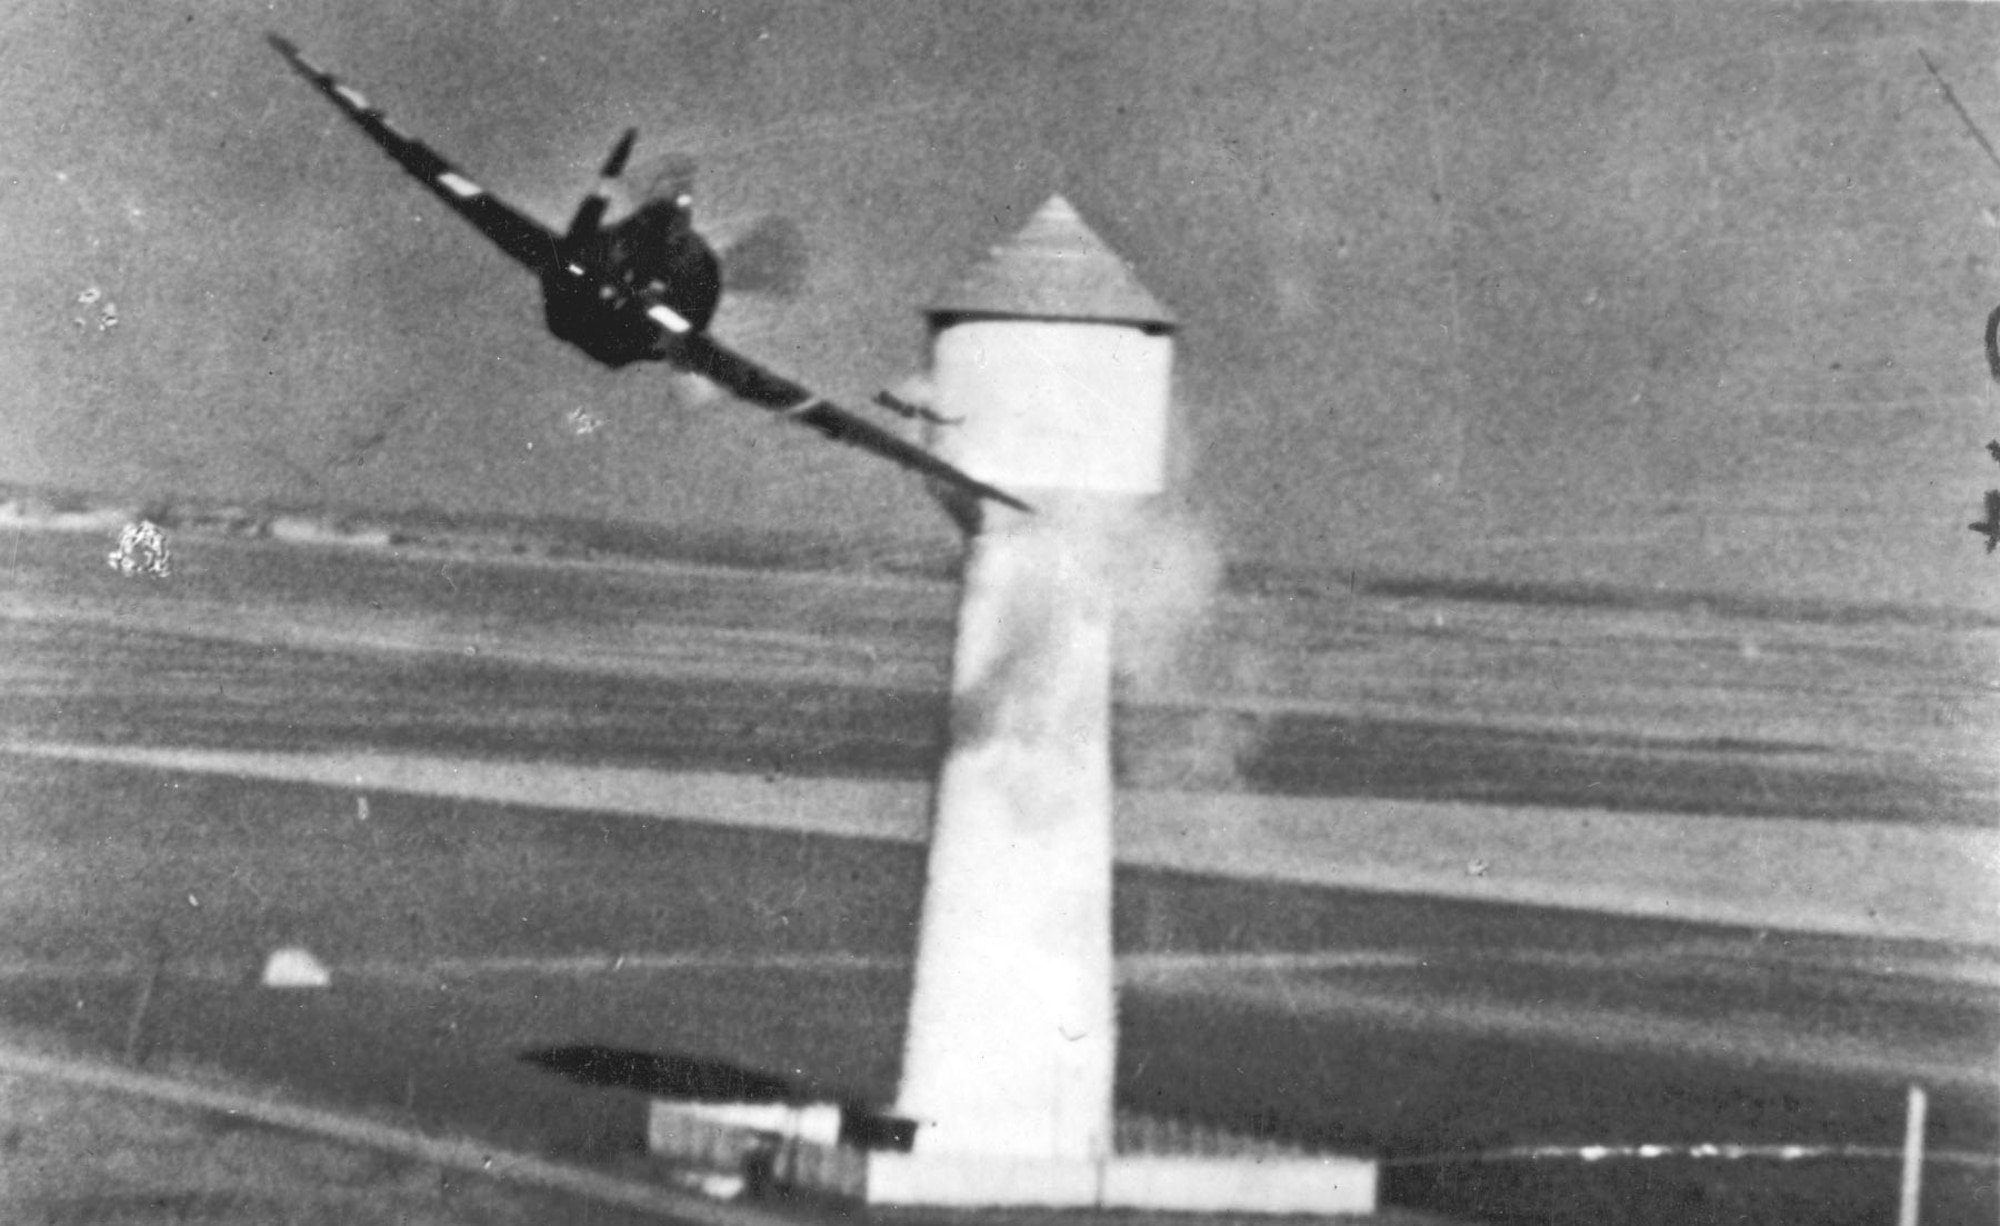 P-47 from the USAAF’s strategic 8th Air Force attacking an antiaircraft (or “flak”) tower. At times, the strategic air forces were also used against the German army and Luftwaffe airfields in Europe. (U.S. Air Force photo)